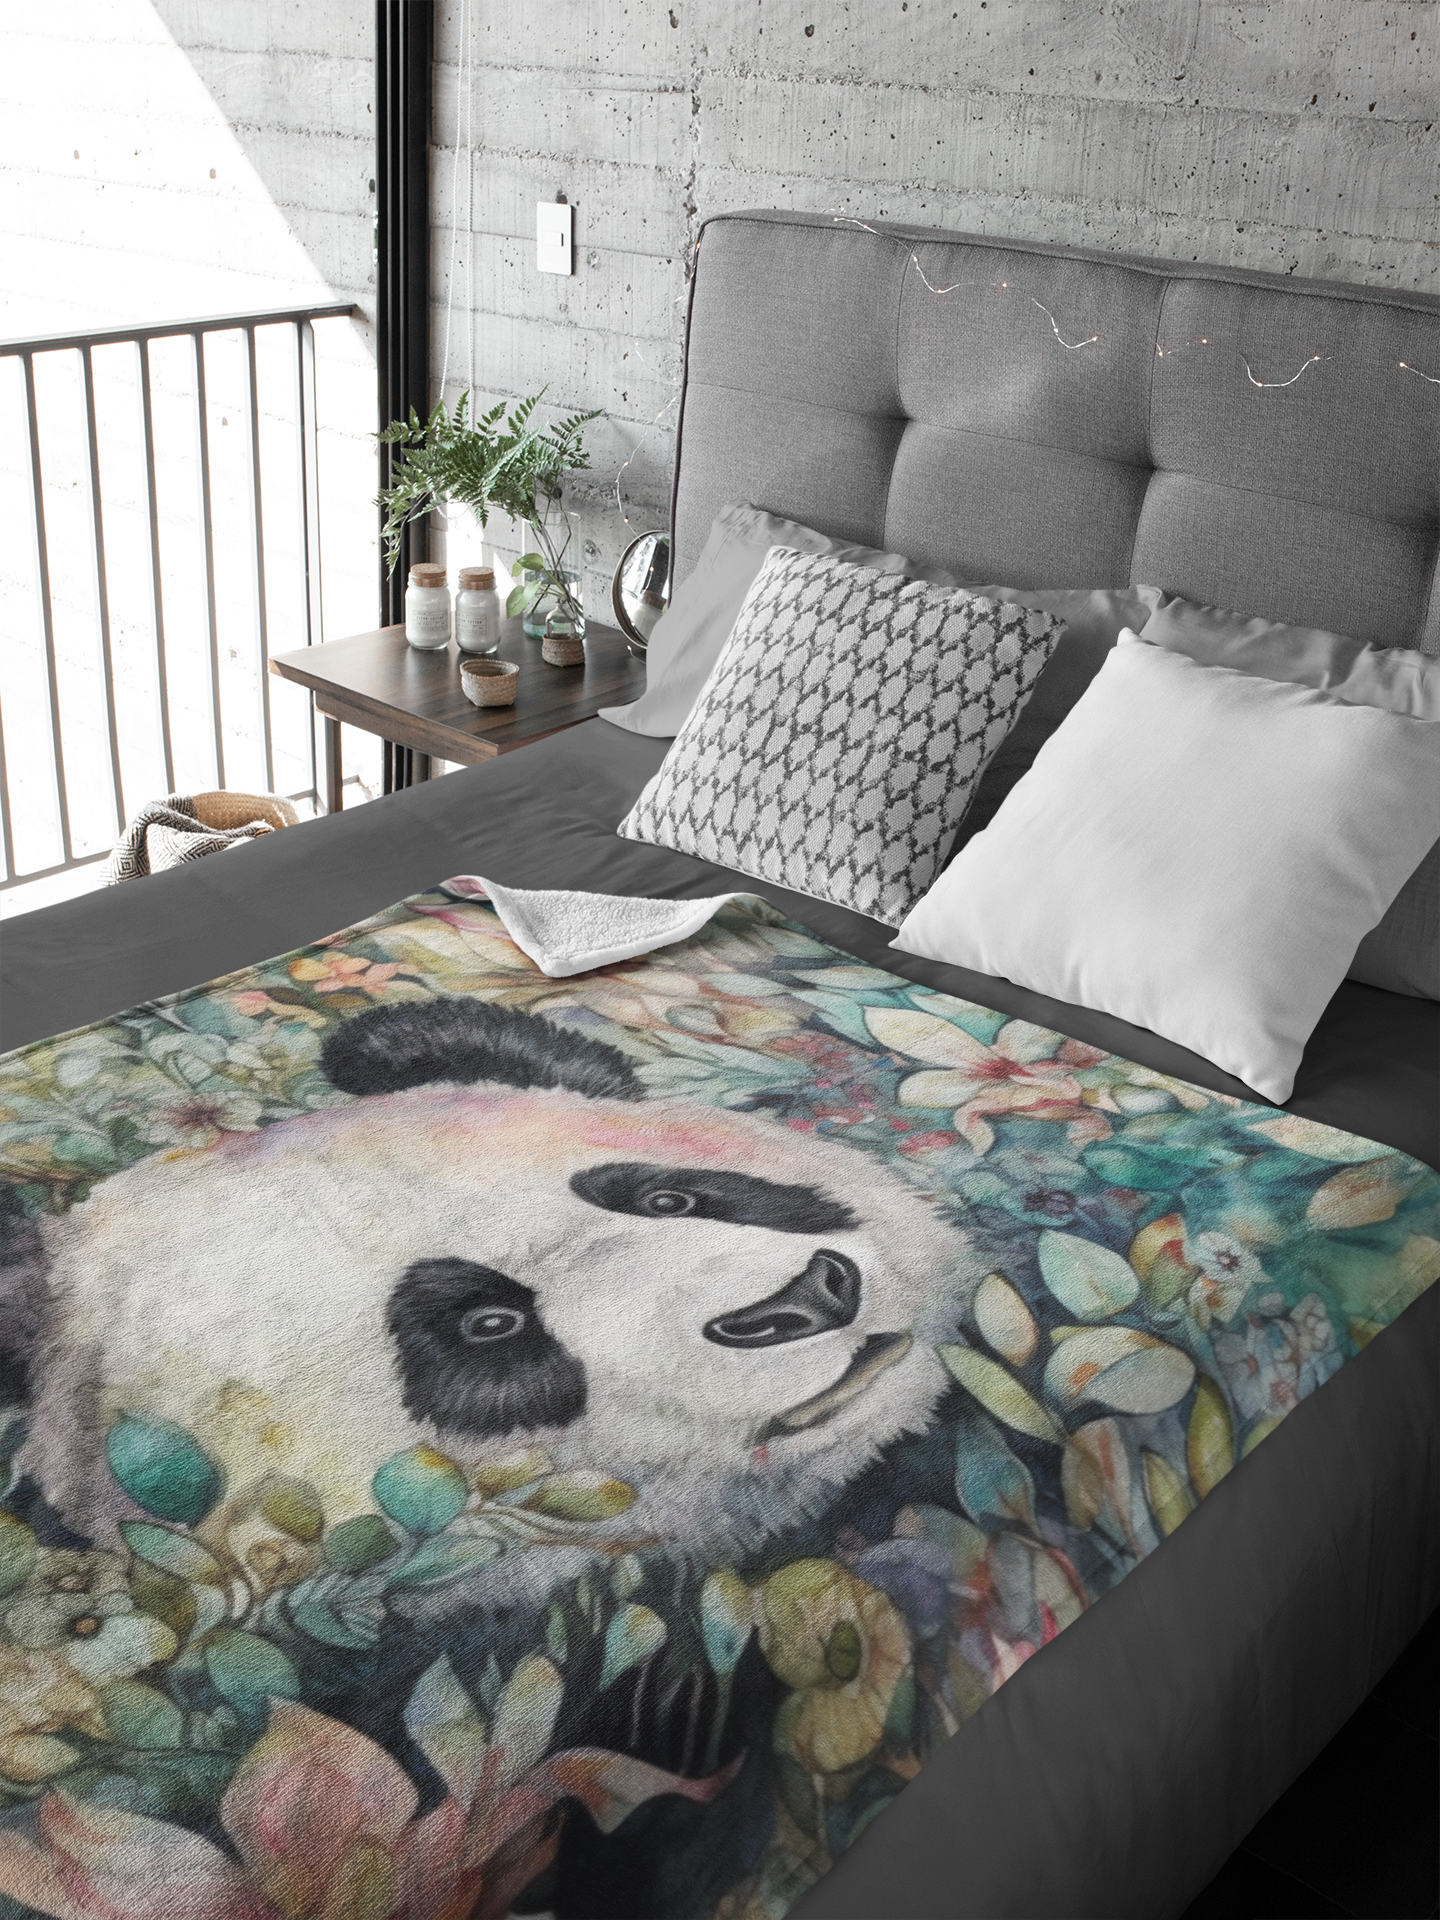 throw blanket, Panda, Panda bear, Panda bear art, home decor, gift ideas, whimsical gifts, nature-inspired, watercolor, comfortable, durable, polyester, lightweight, versatile, gifts for all occasions